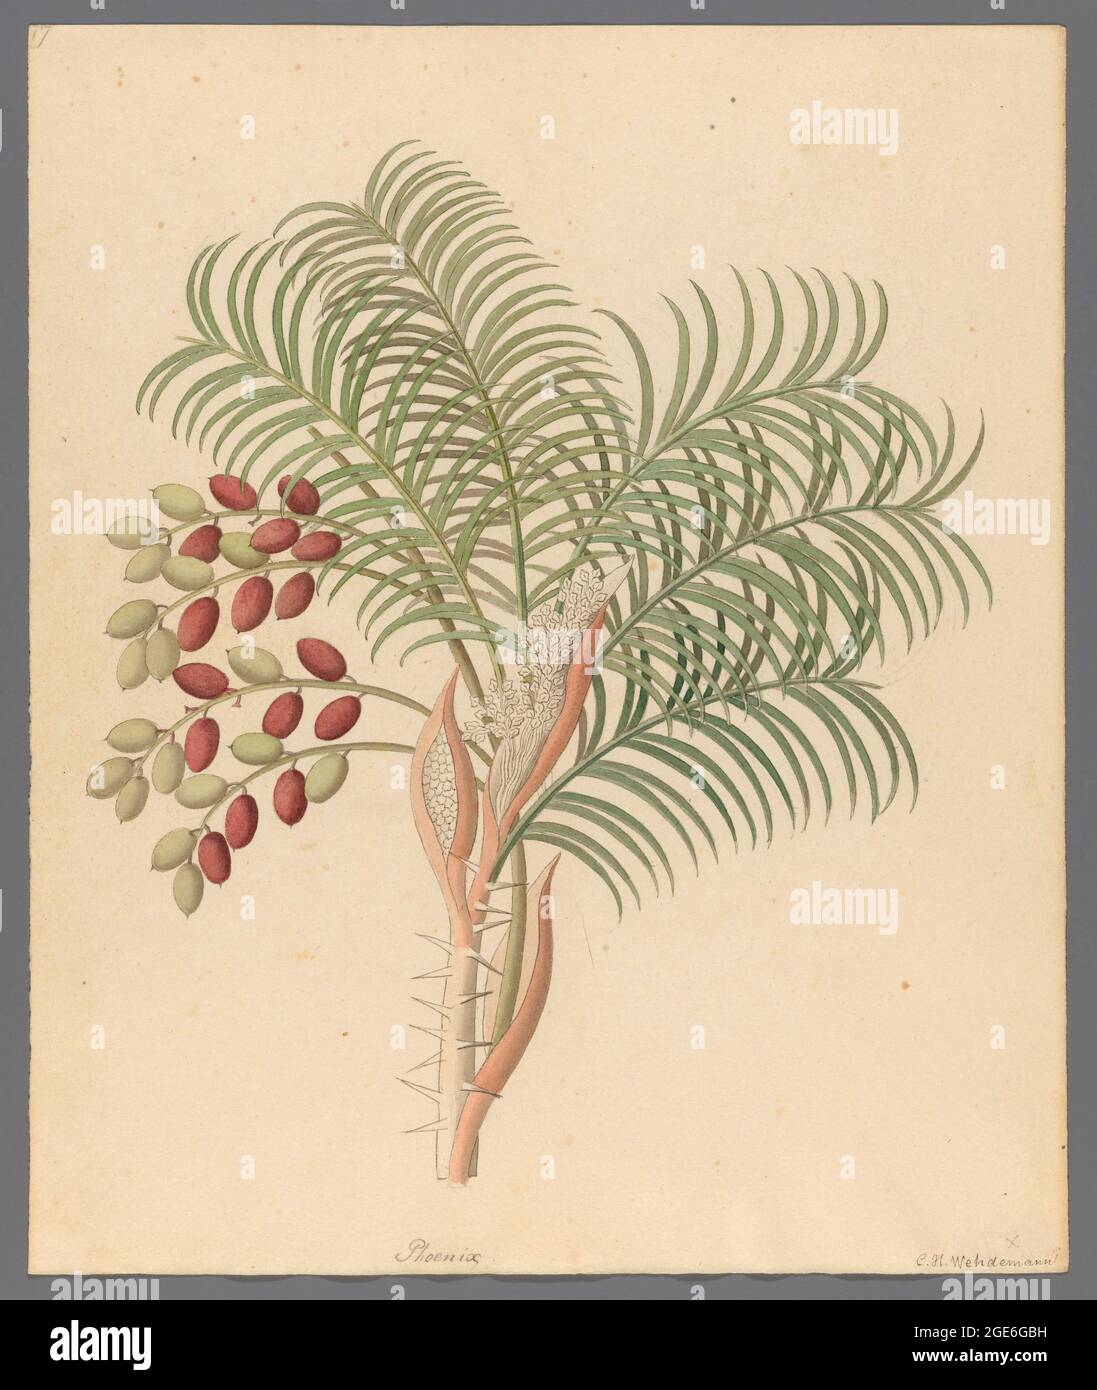 Phoenix [Phoenix reclinata]  wild date palm or Senegal date palm, from a collection of ' Drawings of plants collected at Cape Town ' by Clemenz Heinrich, Wehdemann, 1762-1835 Collected and drawn in the Cape Colony, South Africa Stock Photo